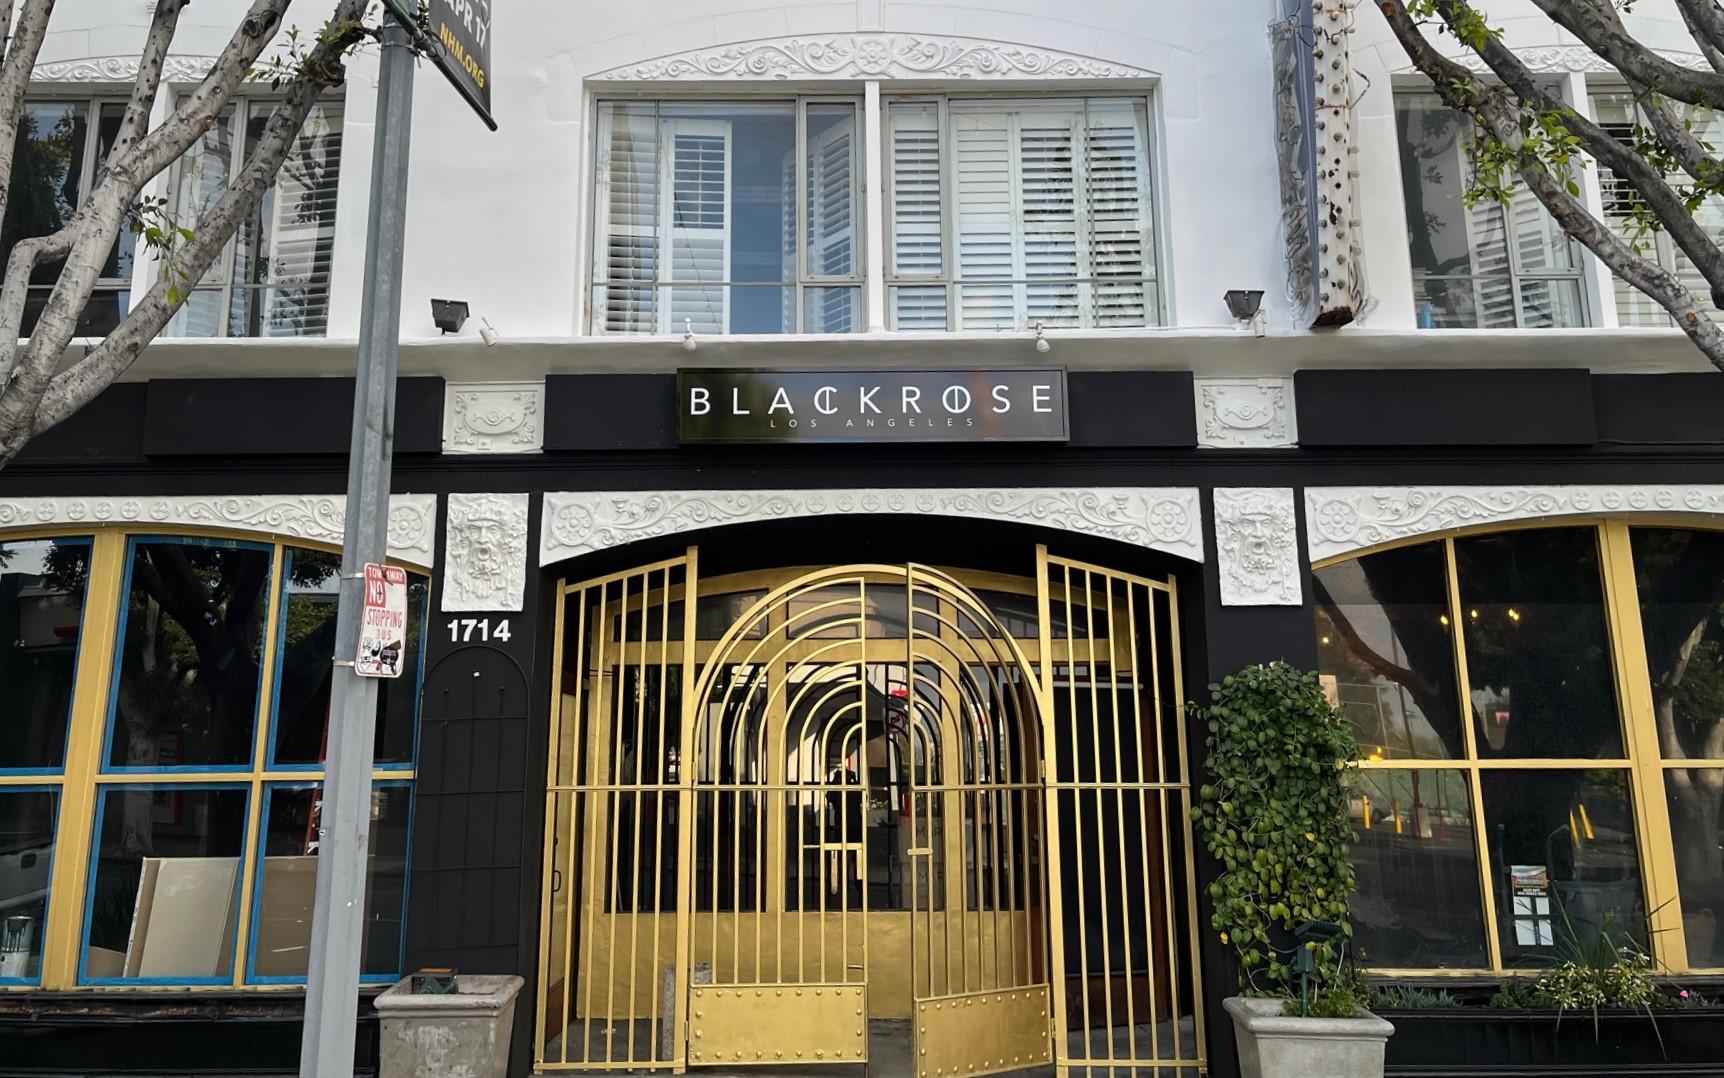 This is the exquisite light box sign we made for BlackRose in Los Angeles. It suits the artistic space well, looming over the gateway, beckoning patrons.